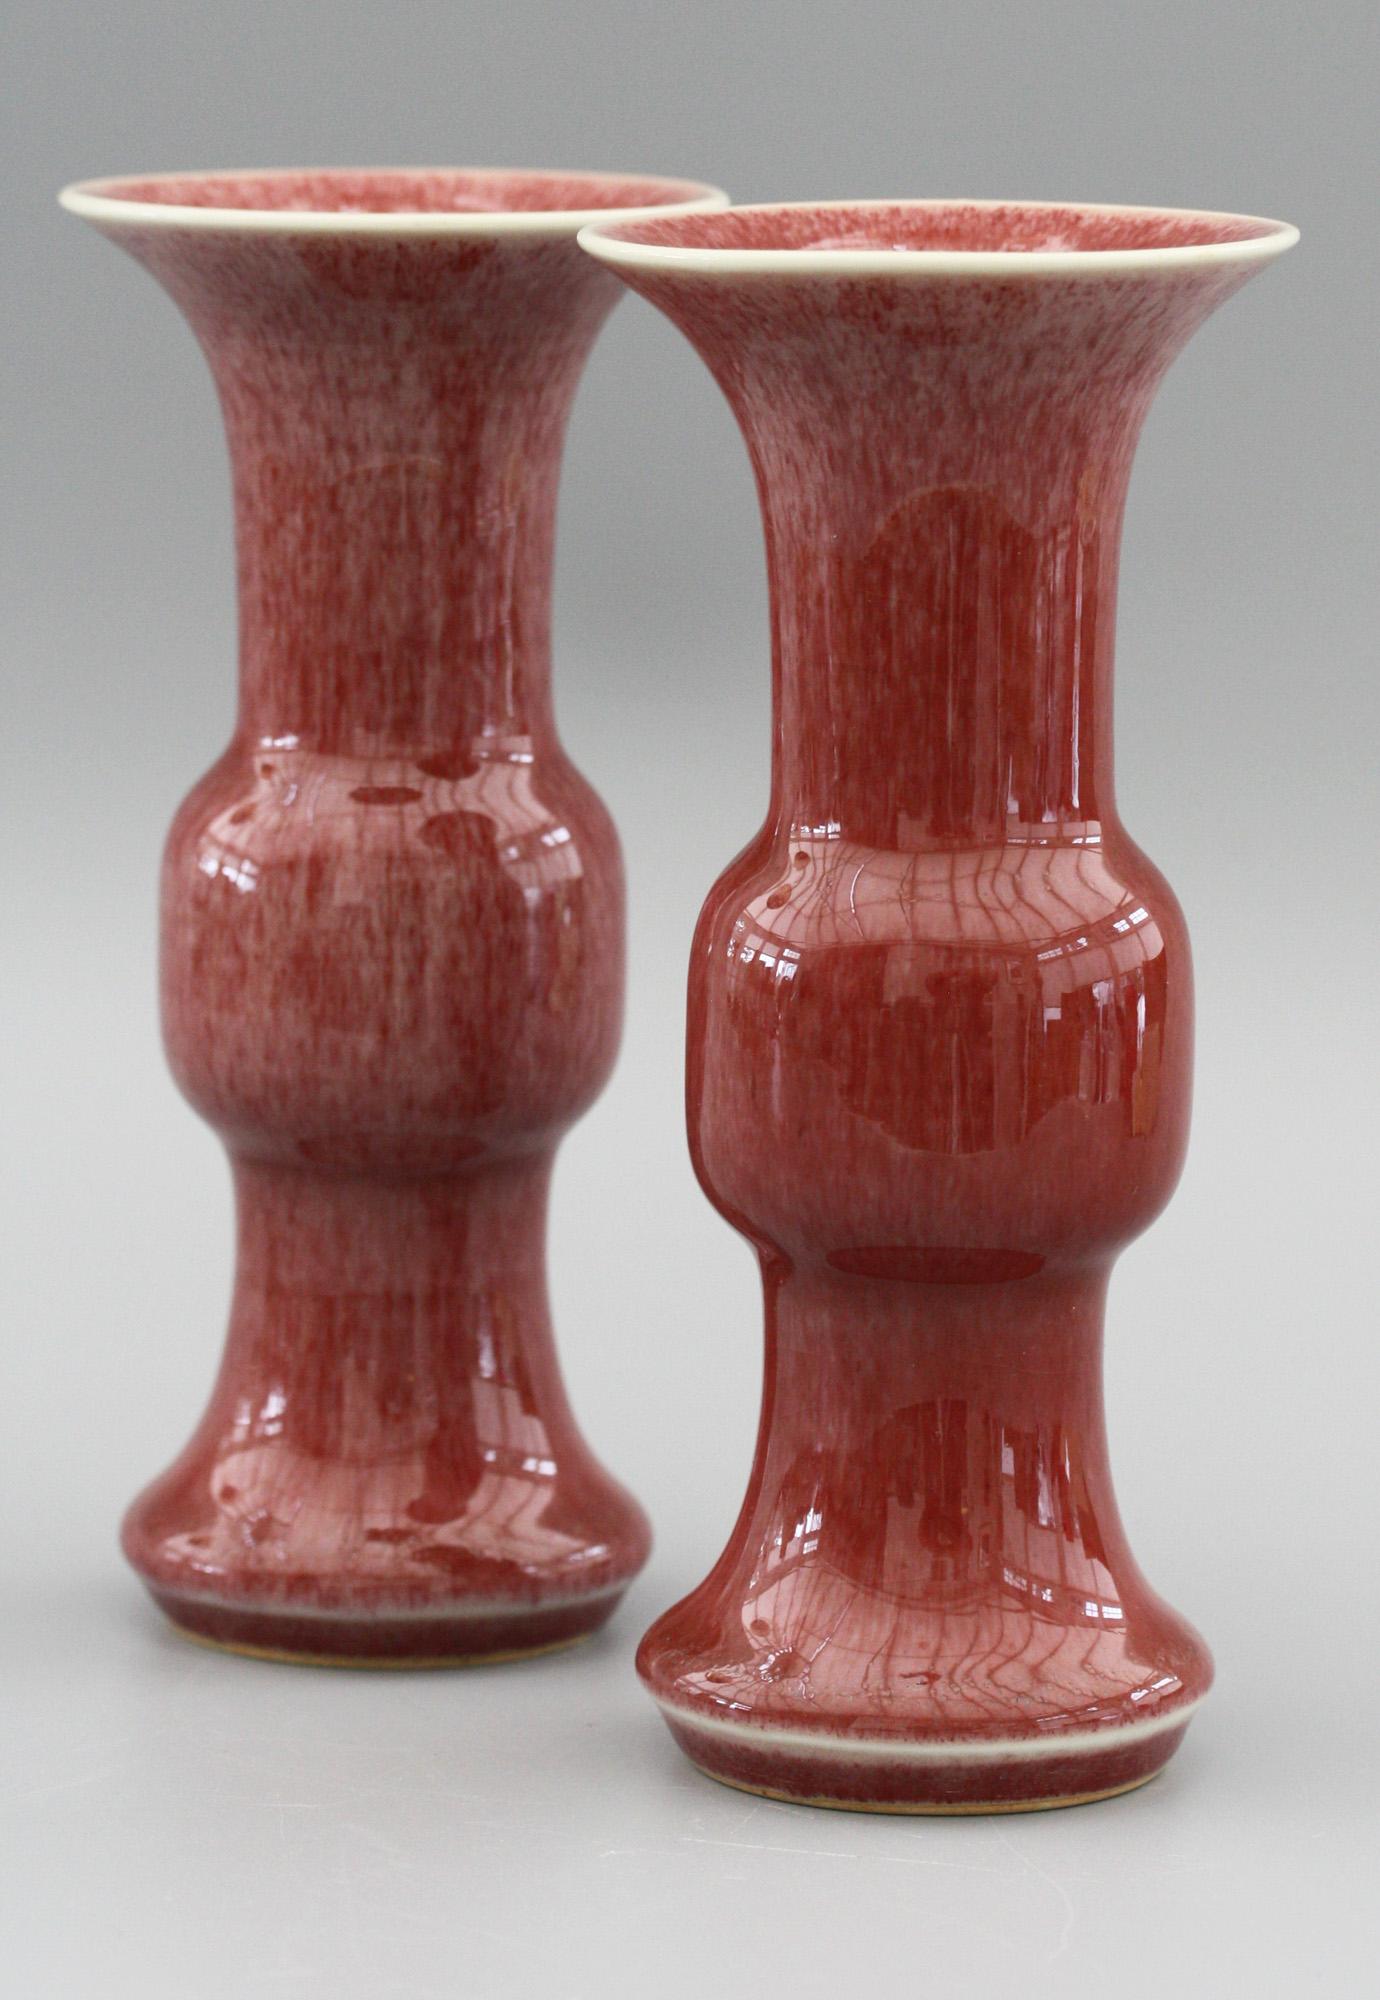 A fine and decorative pair Chinese Qianlong marked gu shaped porcelain vases decorated in red sang de boeuf glazes dating from the 20th century. The vases each have unglazed rounded feet with a skirted foot rim, a bulbous knop shaped body and